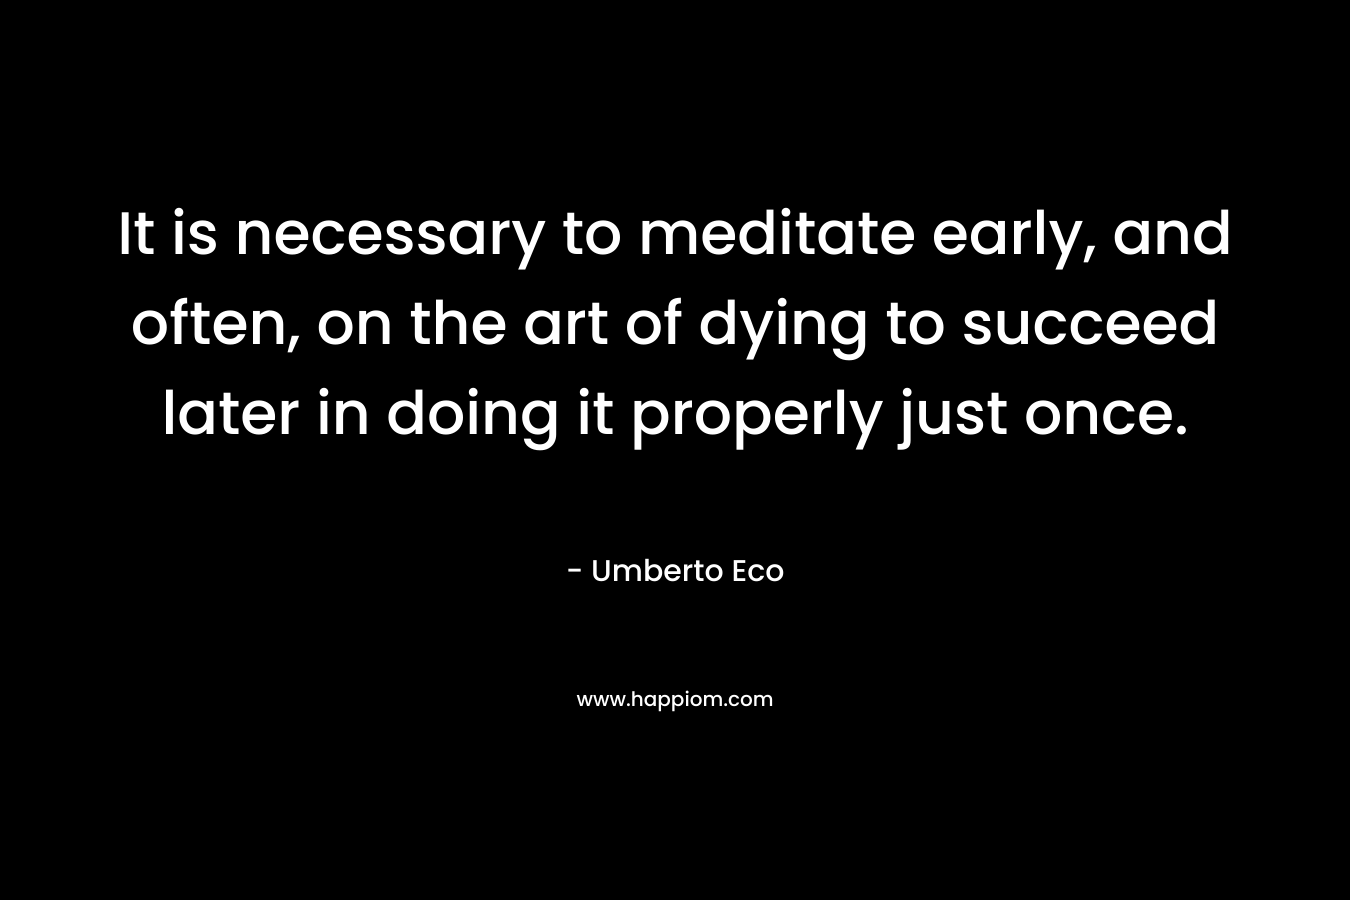 It is necessary to meditate early, and often, on the art of dying to succeed later in doing it properly just once. – Umberto Eco